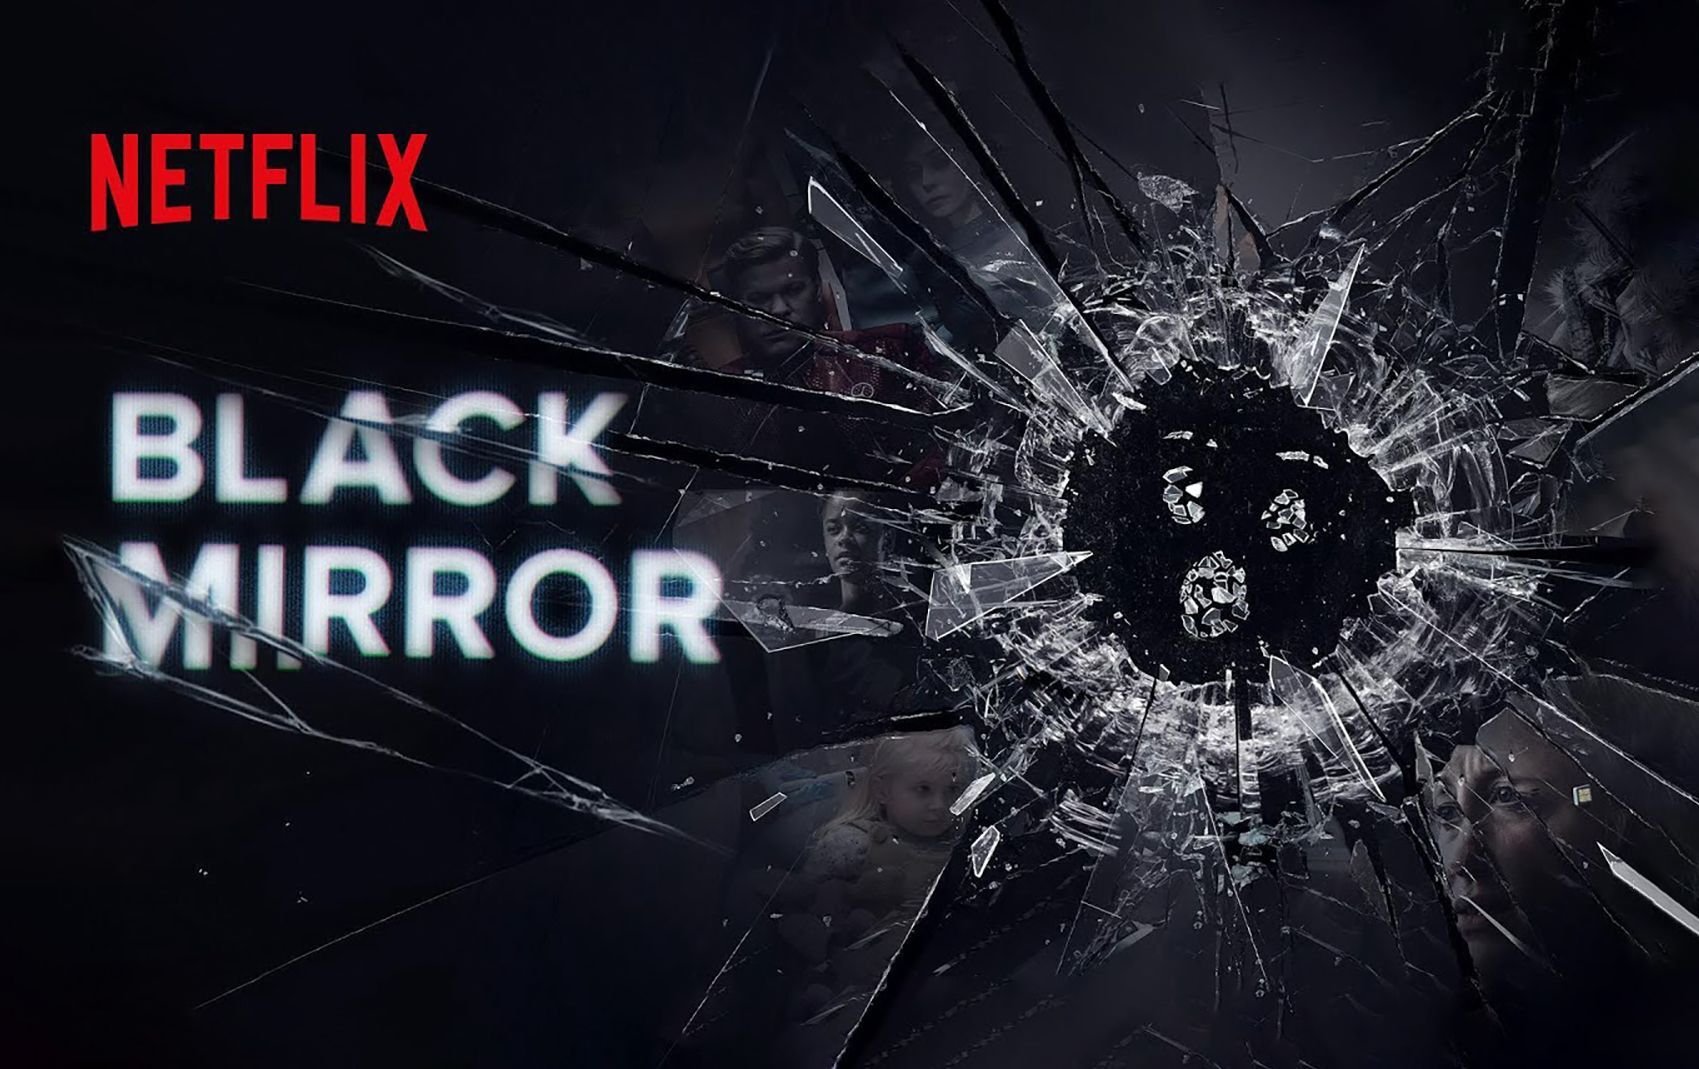 1682535795 161152 Tv News Black Mirror S Season 6 Is Finally In The Works Set To Return To Netflix Image1 Napdcbfxhy 